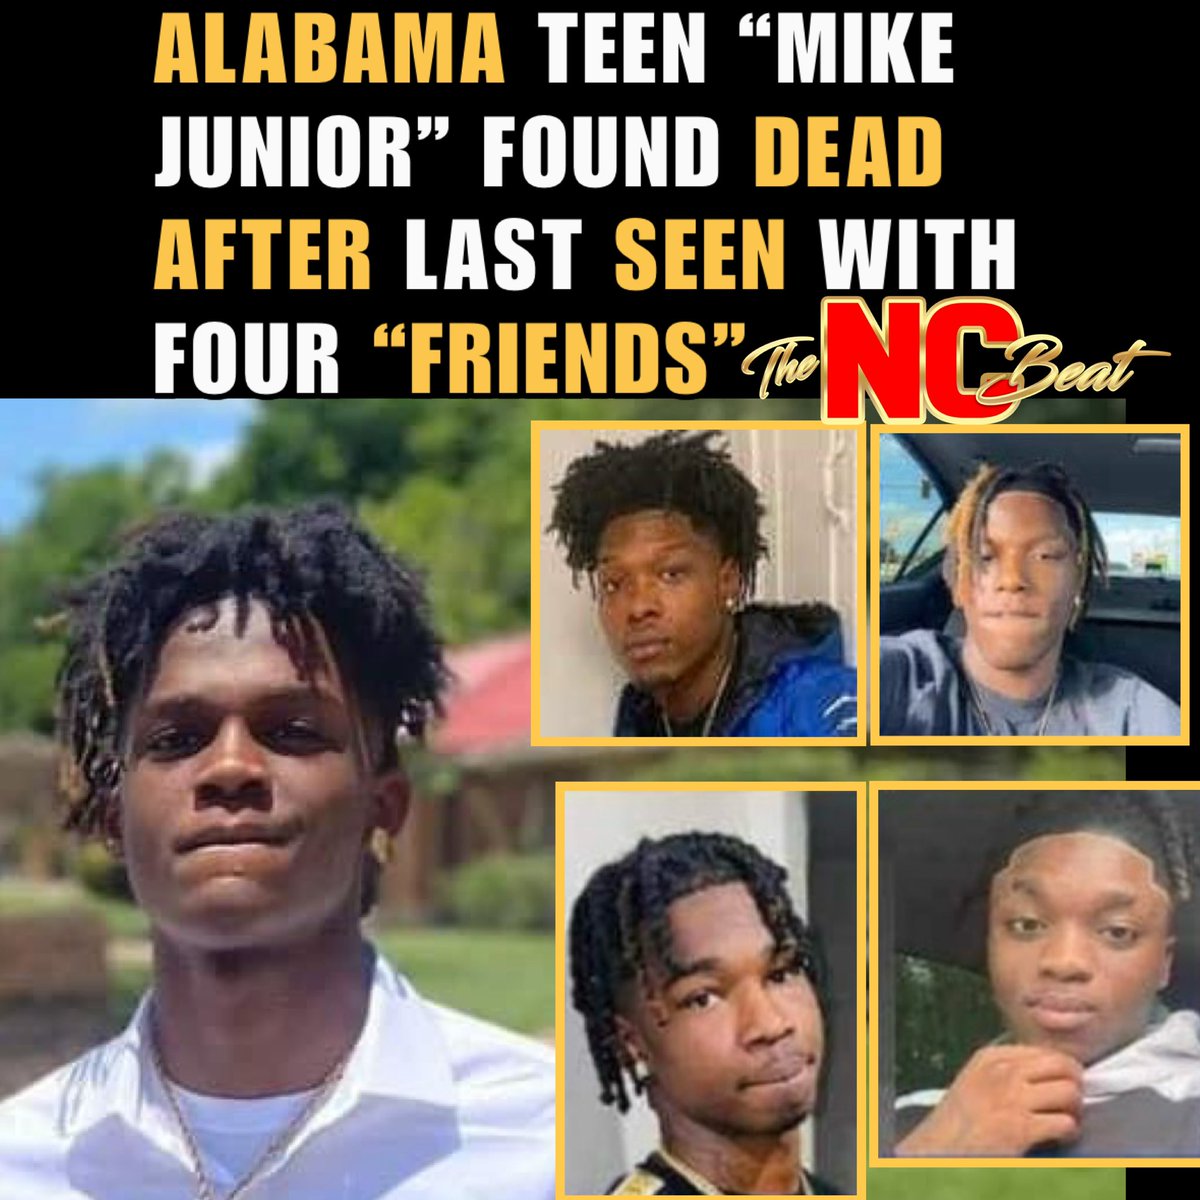 Praying for this family in Montgomery, Alabama. A 16-year-old Michael Cole Junior was found deceased Monday night. He was last seen with four so-called “friends.” thencbeat.com/alabama-teen-m…